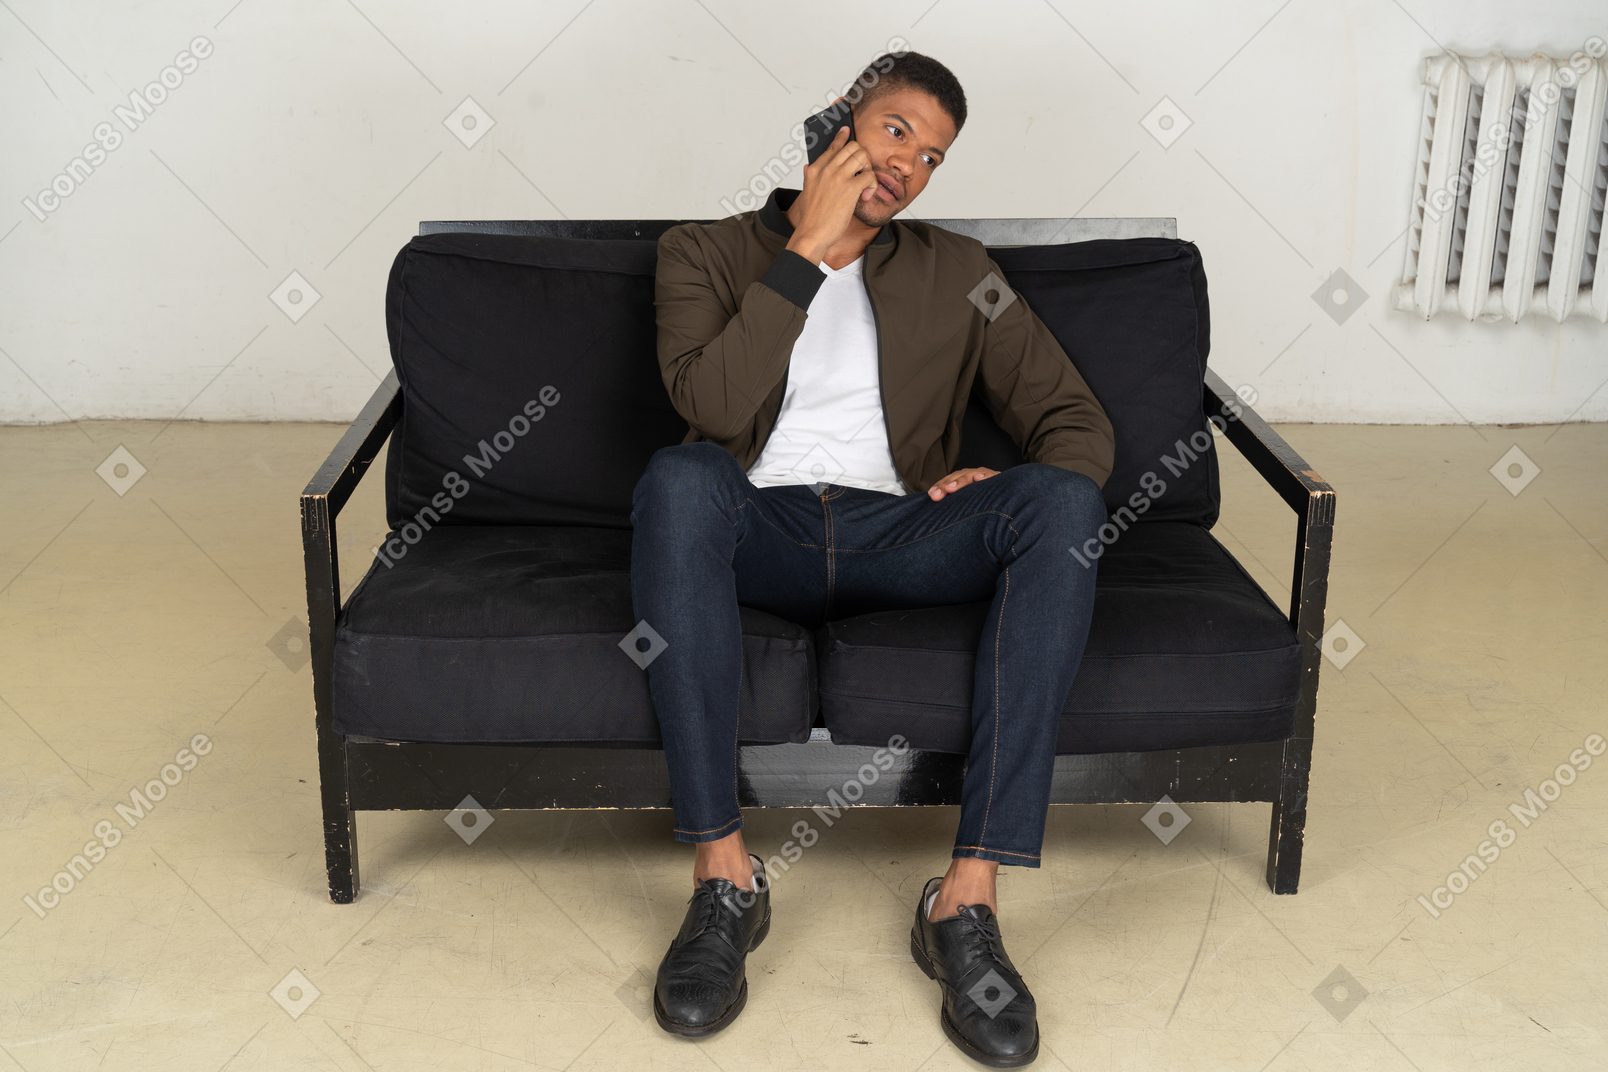 Front view of a perplexed young man sitting on a sofa and talking on his phone